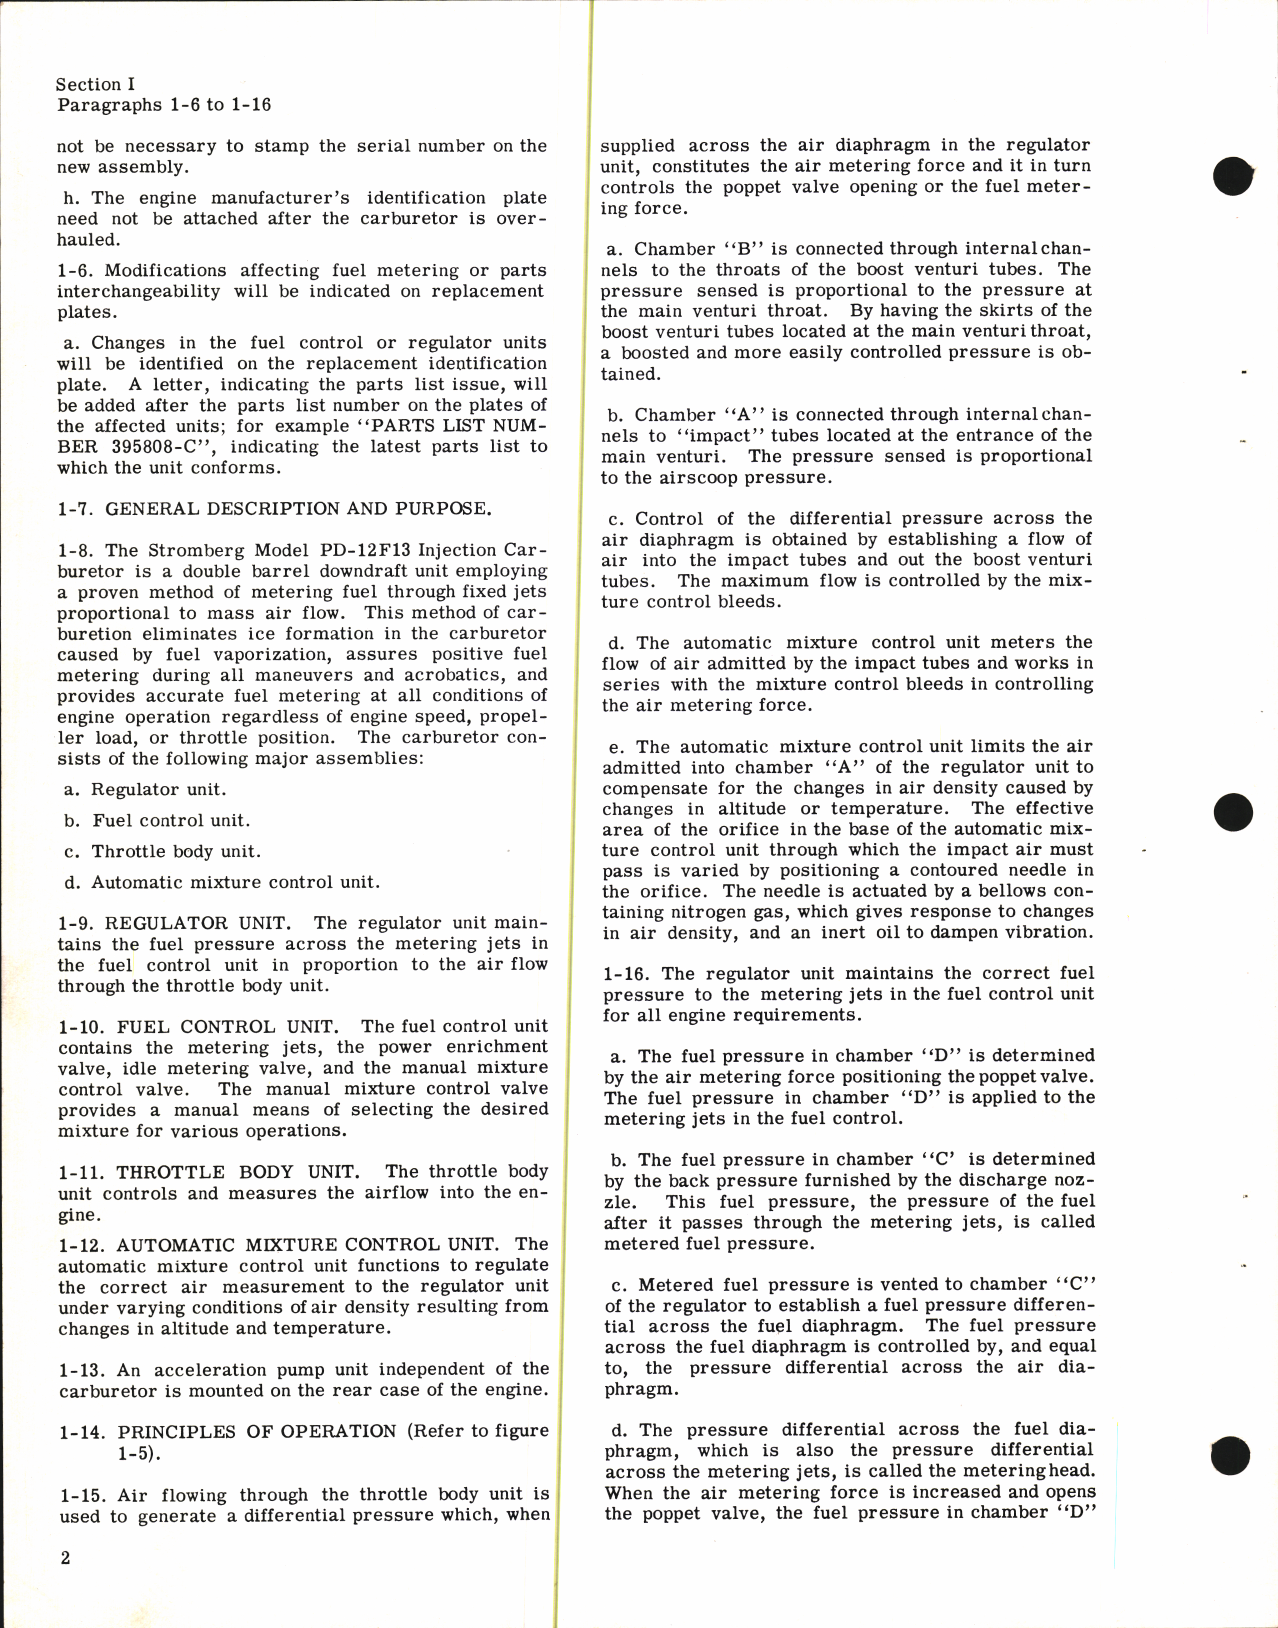 Sample page 6 from AirCorps Library document: Overhaul Instructions for Stromberg Injection Carburetor Model PD-12F13